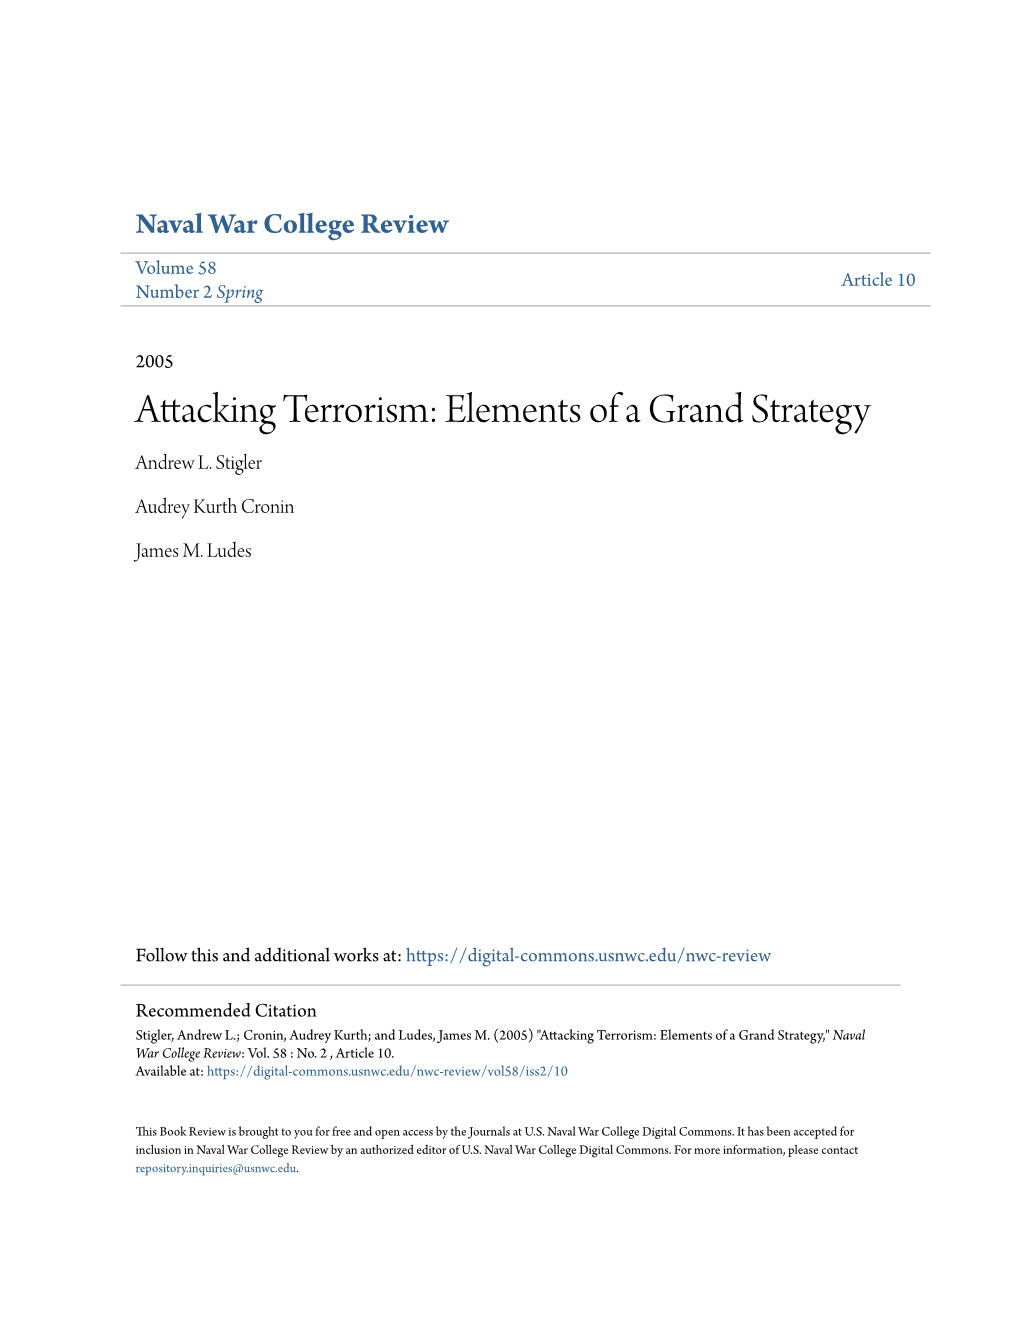 Attacking Terrorism: Elements of a Grand Strategy Andrew L